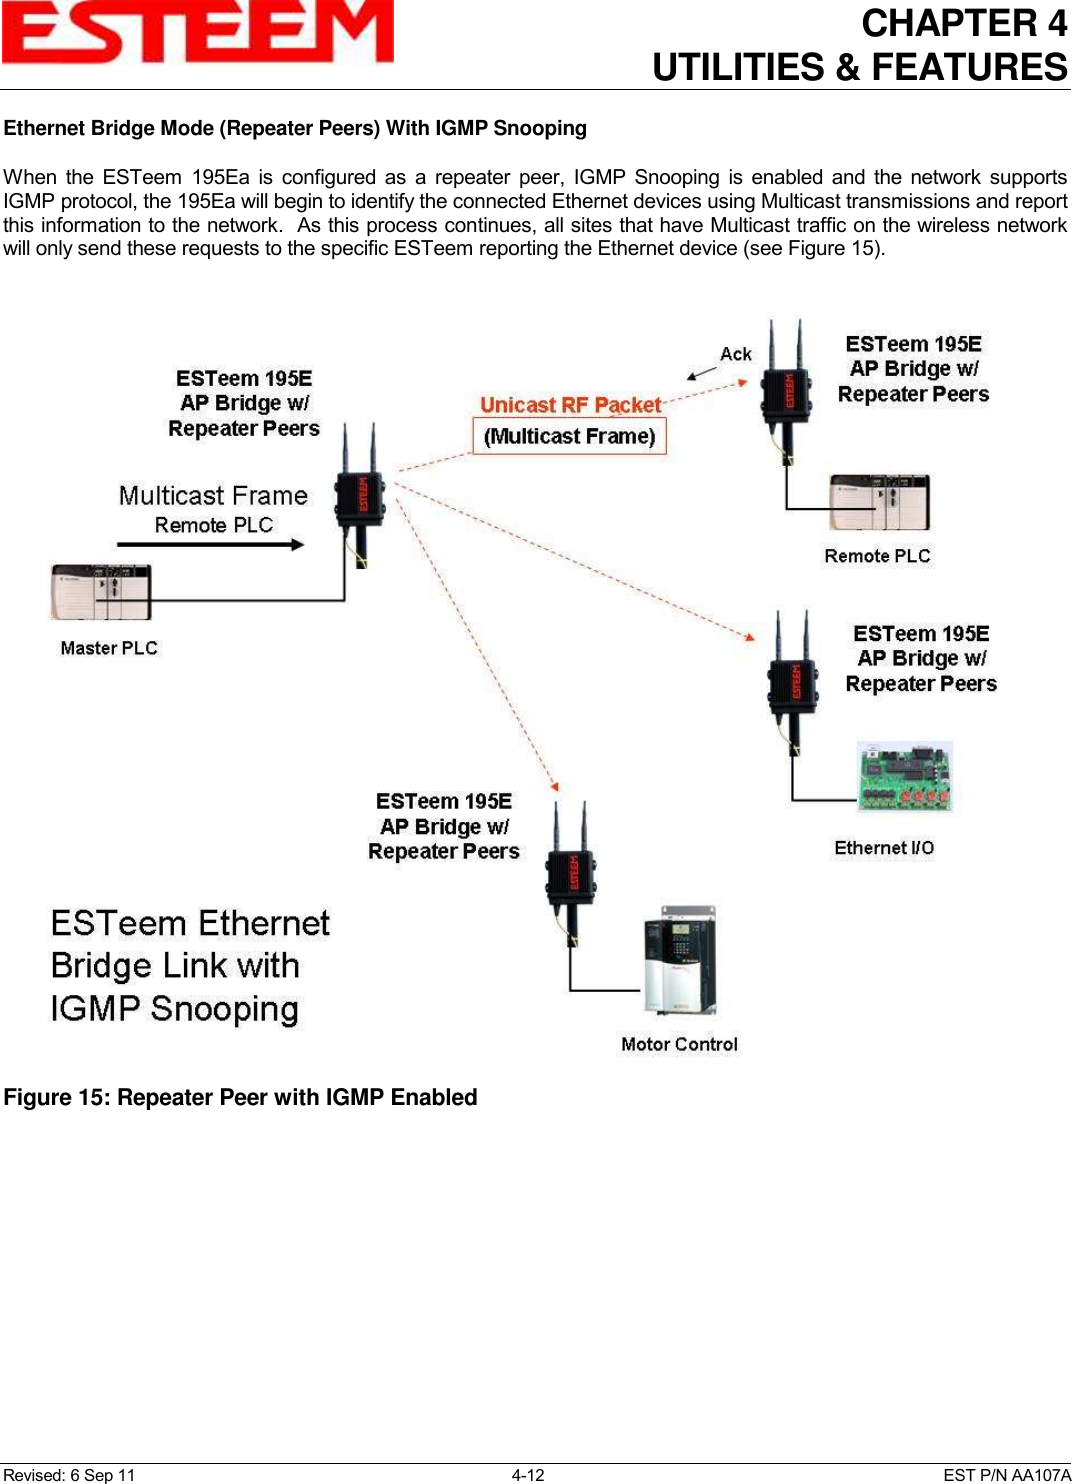 CHAPTER 4   UTILITIES &amp; FEATURES  Revised: 6 Sep 11  4-12  EST P/N AA107A Ethernet Bridge Mode (Repeater Peers) With IGMP Snooping  When  the  ESTeem  195Ea  is  configured  as  a  repeater  peer,  IGMP  Snooping  is  enabled  and  the network  supports IGMP protocol, the 195Ea will begin to identify the connected Ethernet devices using Multicast transmissions and report this information to the network.  As this process continues, all sites that have Multicast traffic on the wireless network will only send these requests to the specific ESTeem reporting the Ethernet device (see Figure 15).   Figure 15: Repeater Peer with IGMP Enabled  